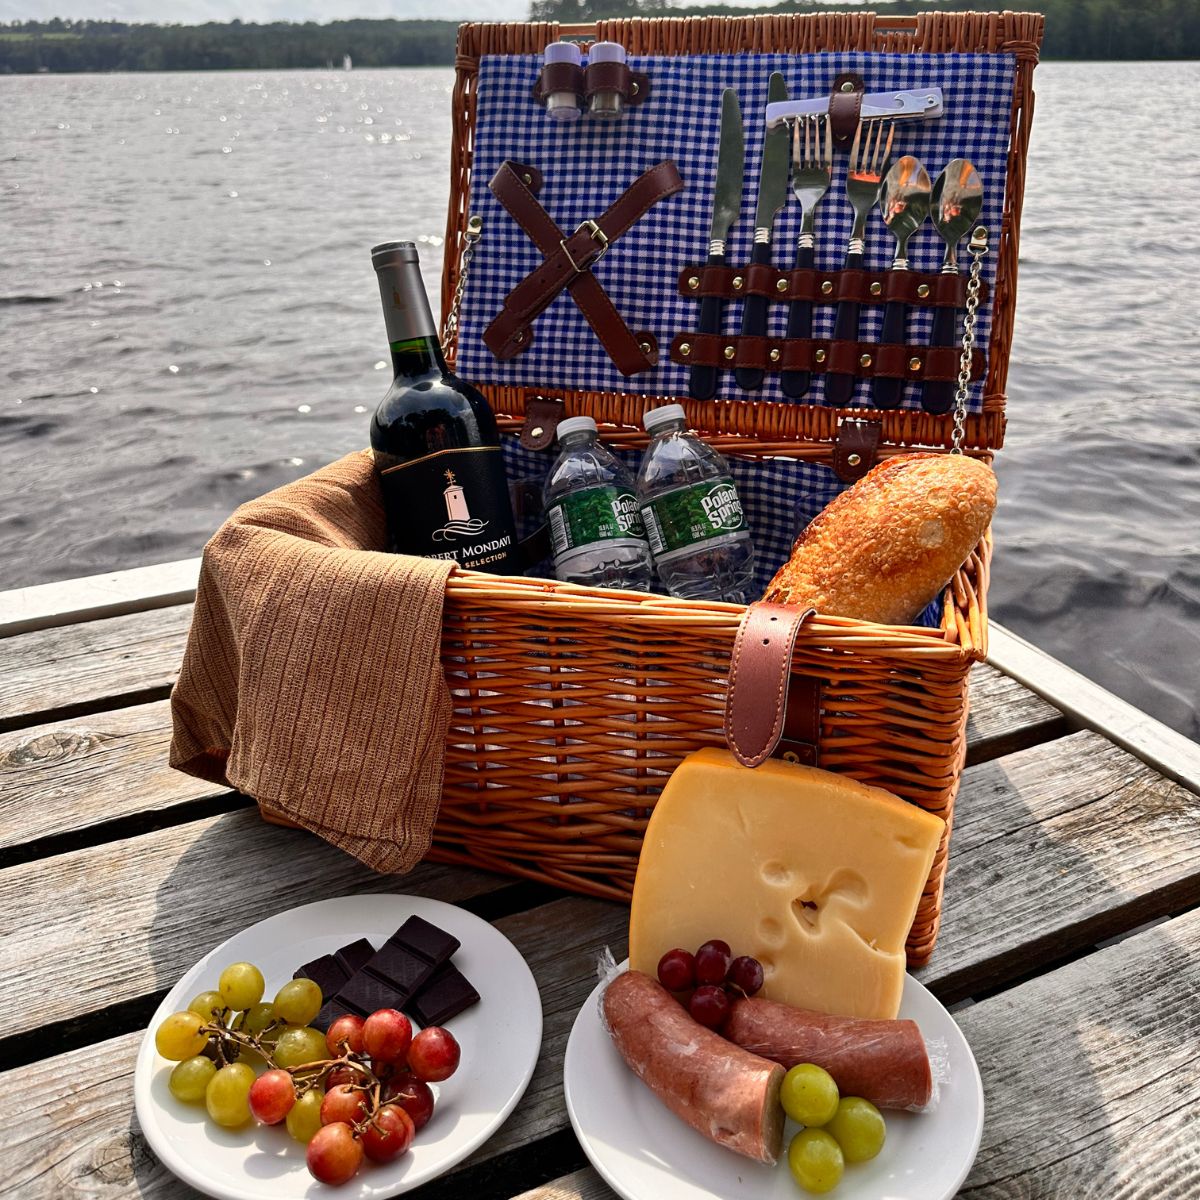 picnic basket with wine, water, grapes, chocolate, bread, and cheese